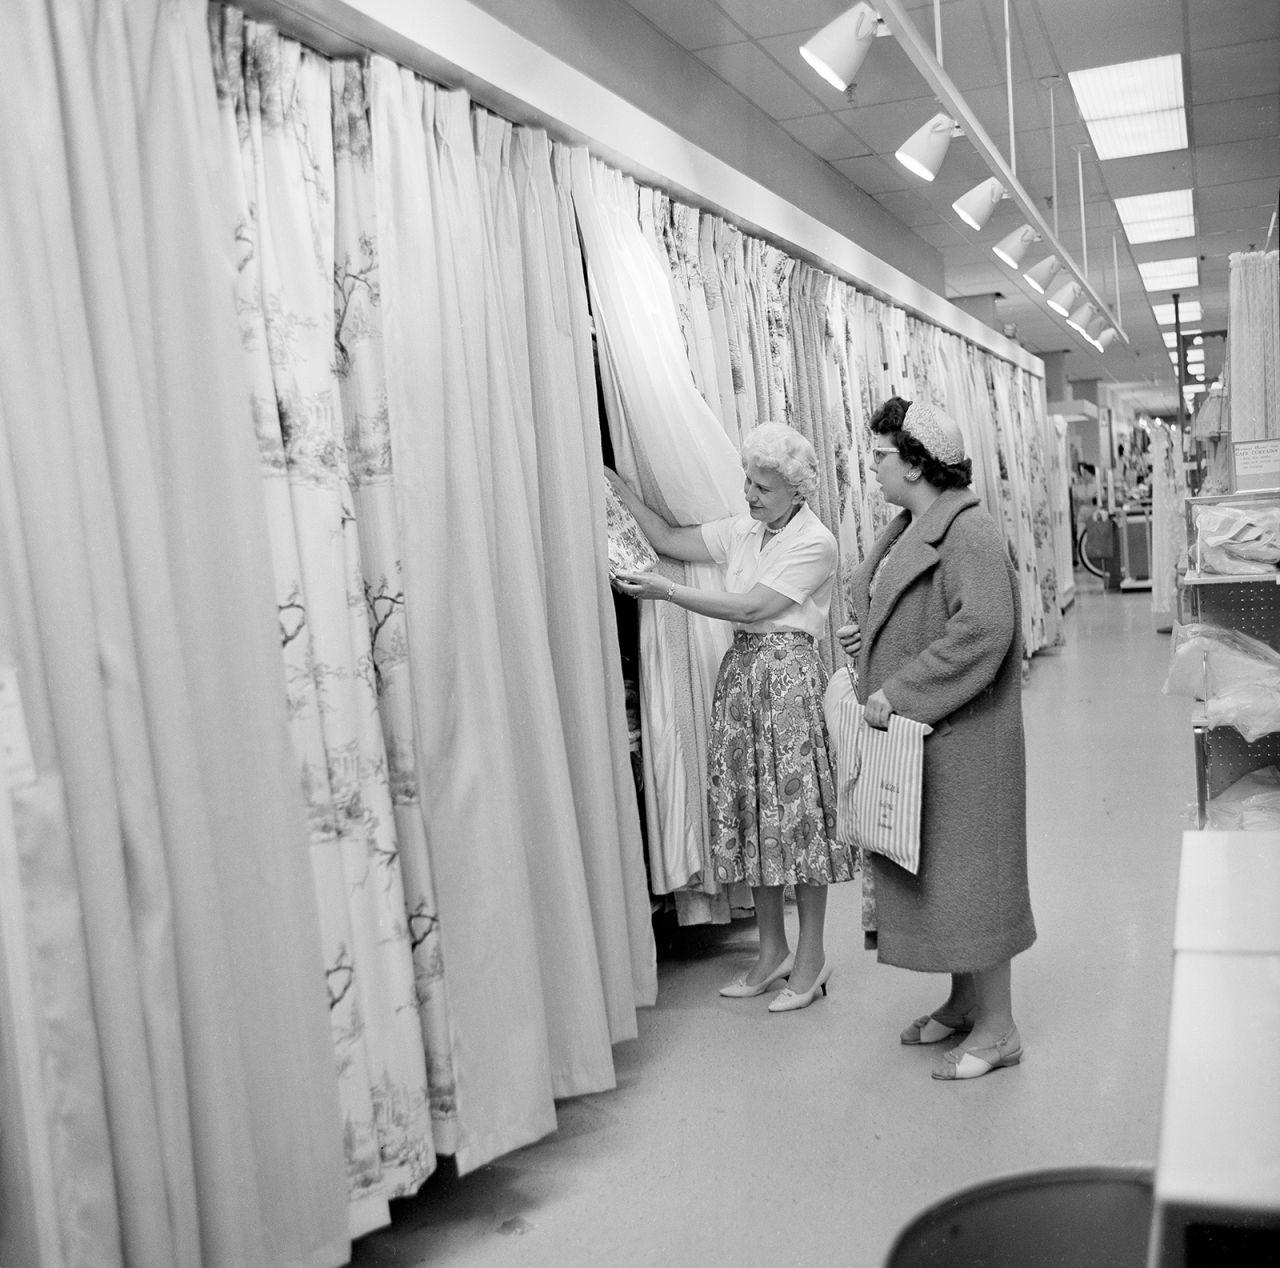 Sales clerk Lucille Jagusch shows drapery samples to shopper Arlene Hardt at a Sears store in Niles, Illinois, in 1961.